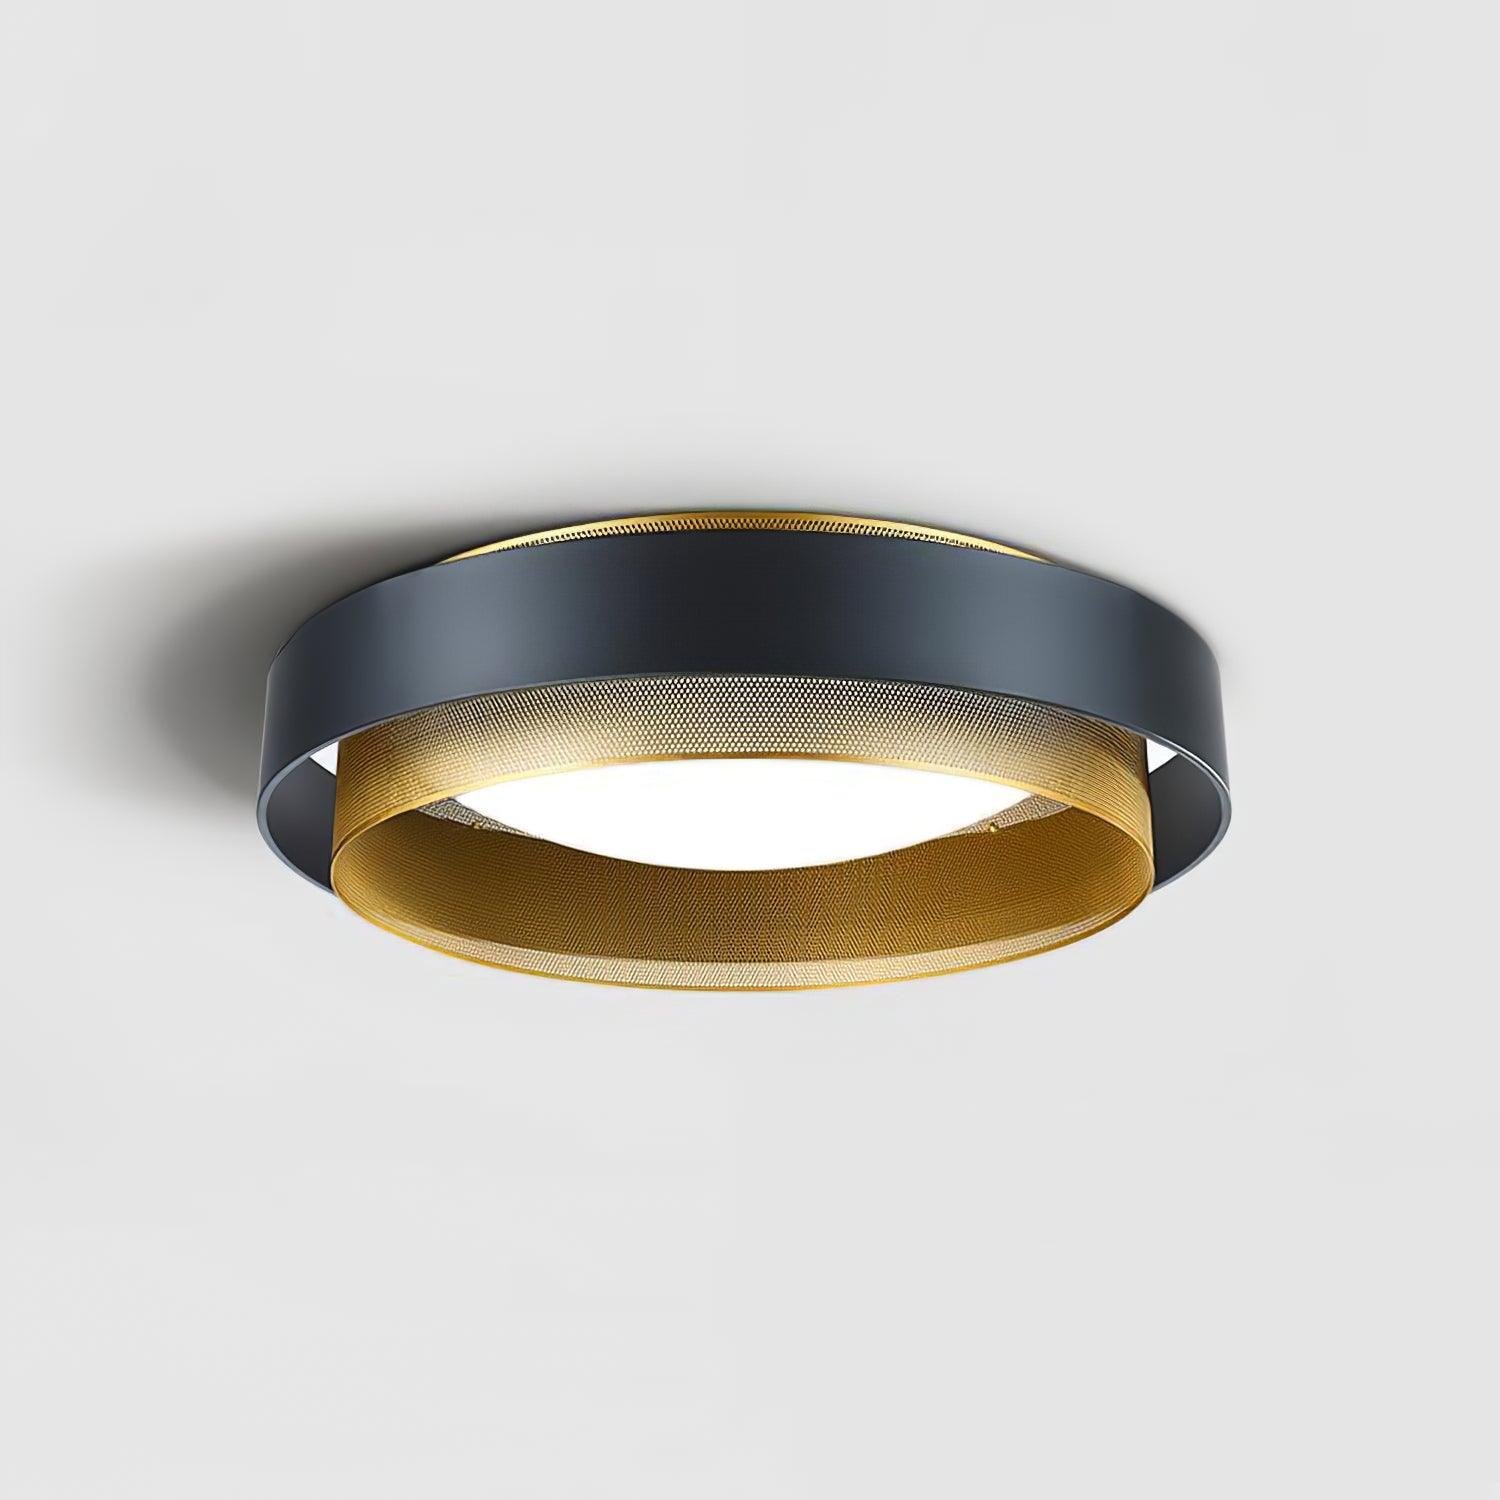 Reworded 
"Nolan Ceiling Light - 24.4" Diameter x 5.9" Height (62cm Dia x 15cm H) - Gold and Black Finish - Light Changes between Three Colors"